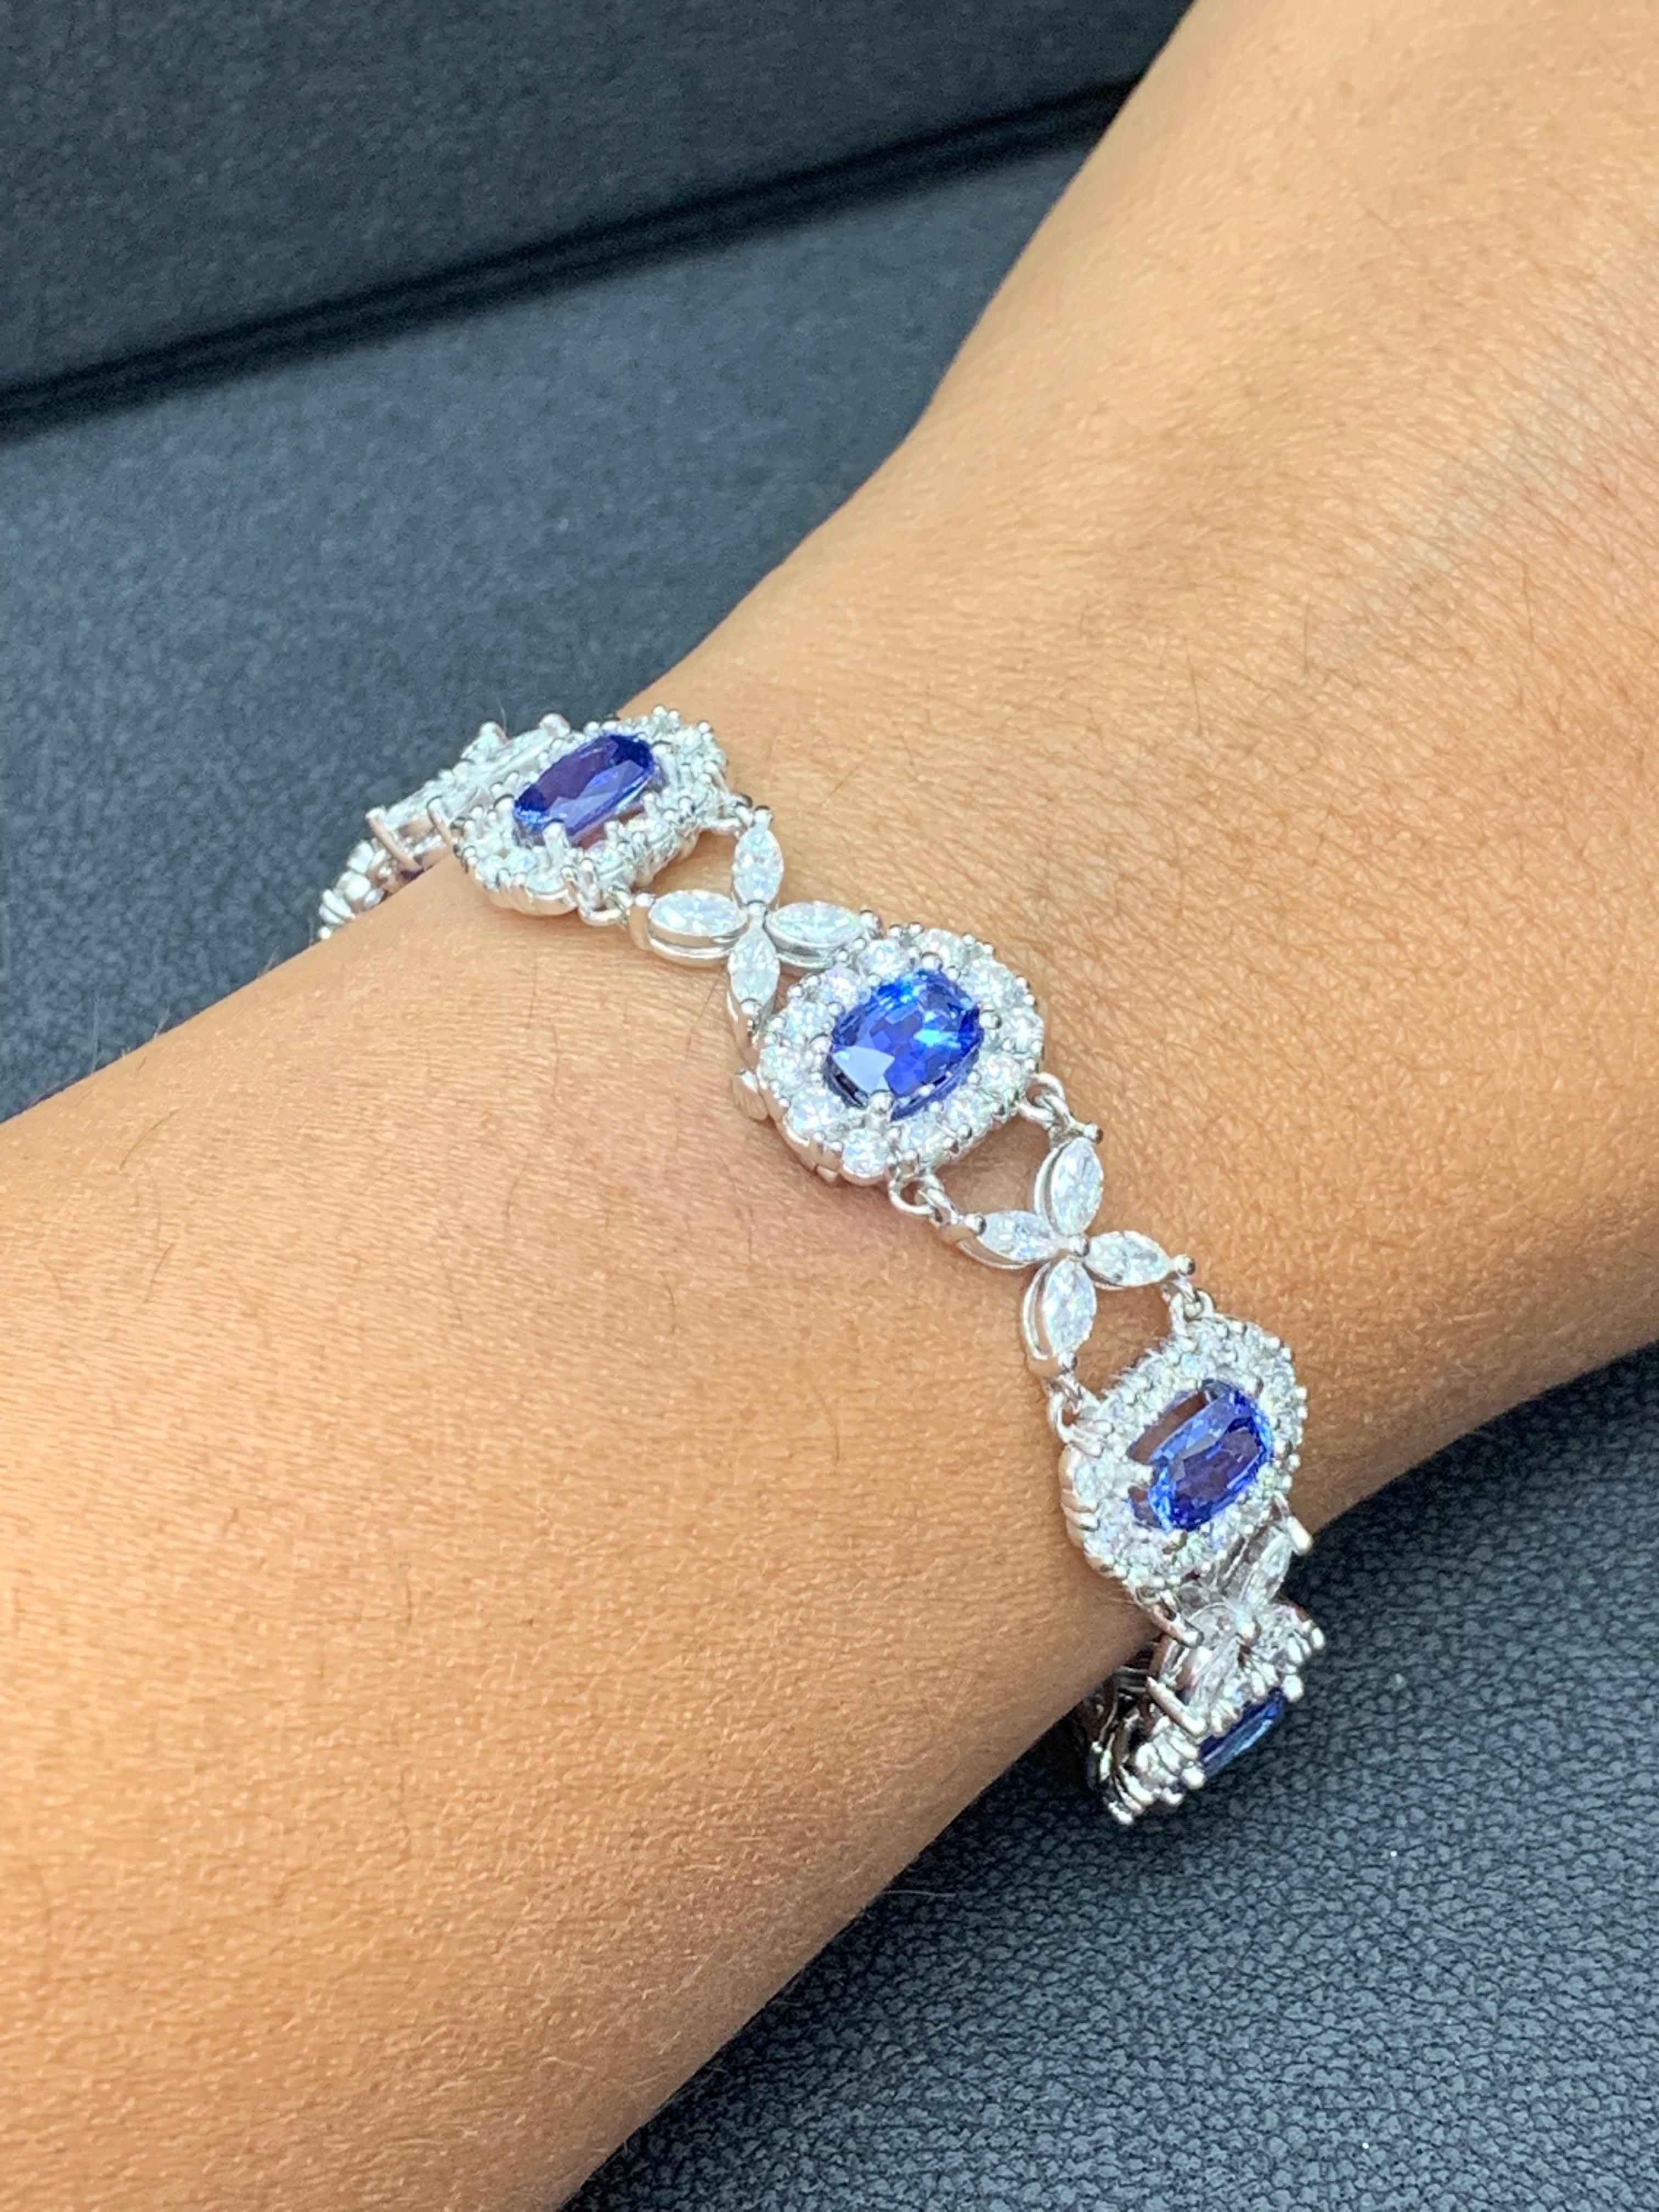 11.47 Carat Oval Cut Blue Sapphire and Diamond Tennis Bracelet in 14K White Gold For Sale 5